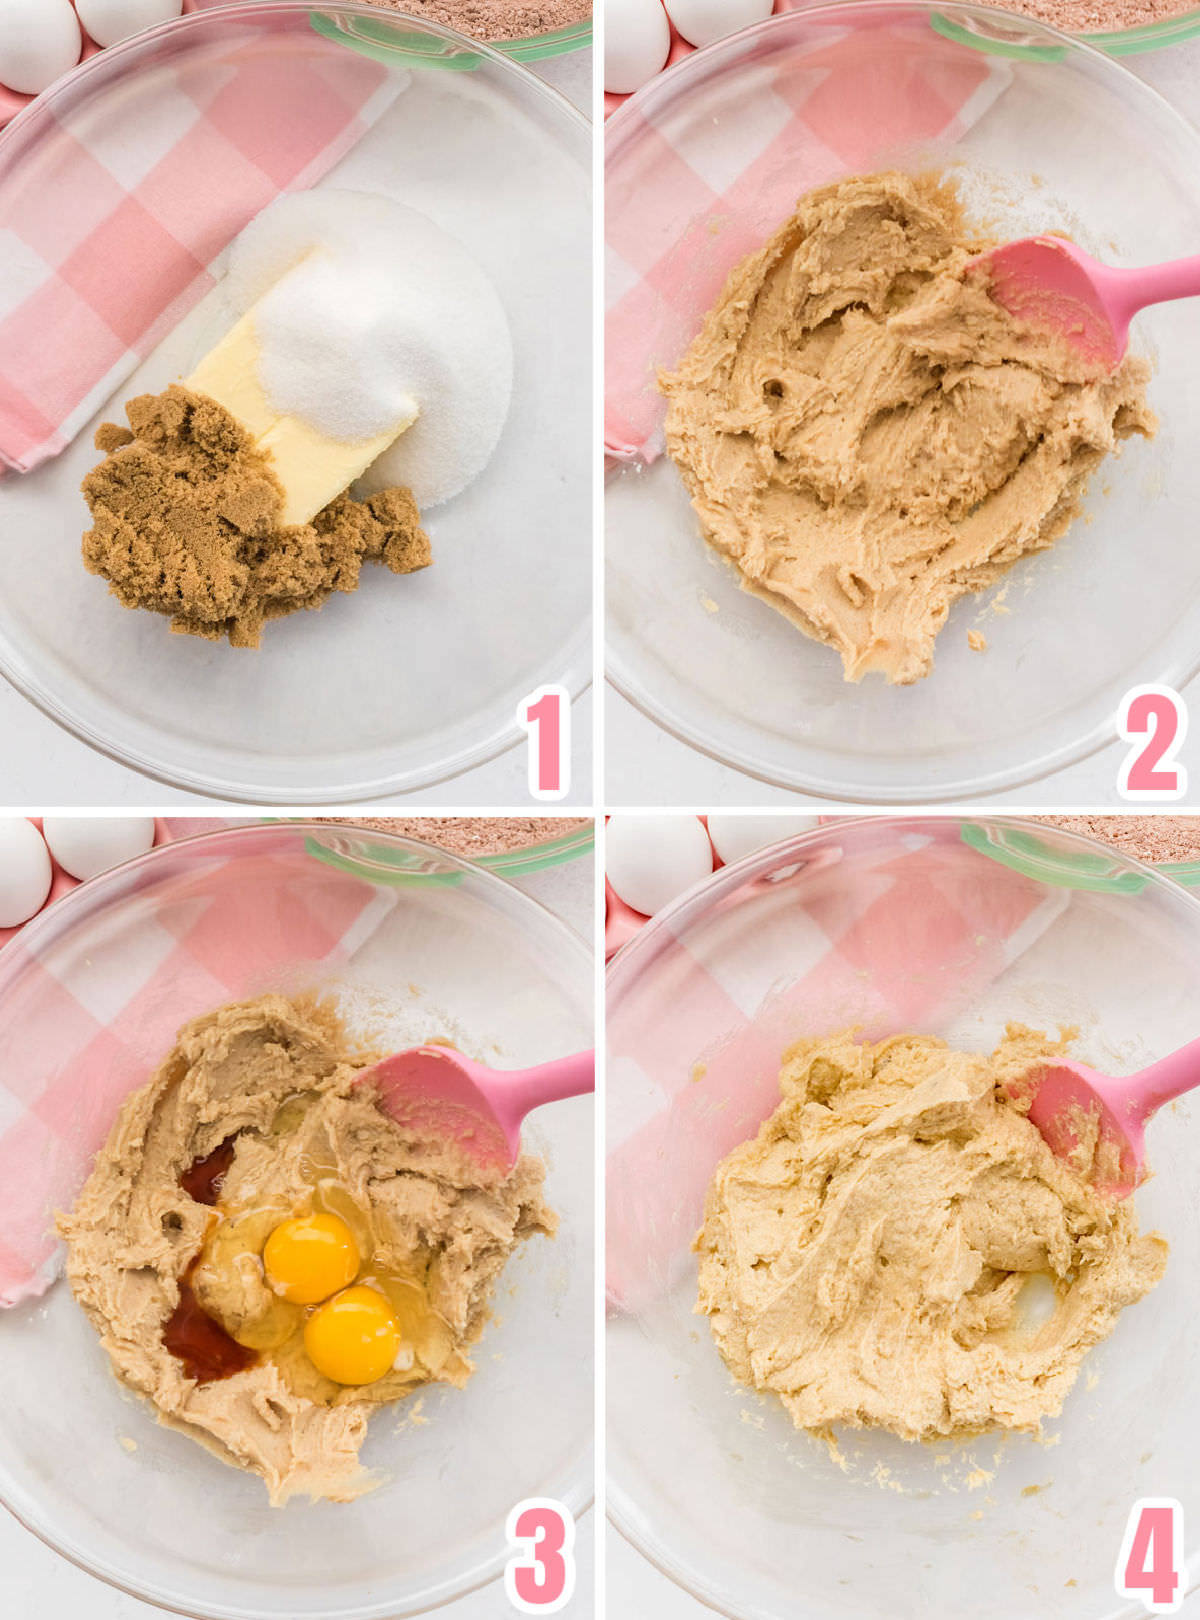 Collage image showing the steps for making the cookie dough for the Chocolate Cookies.